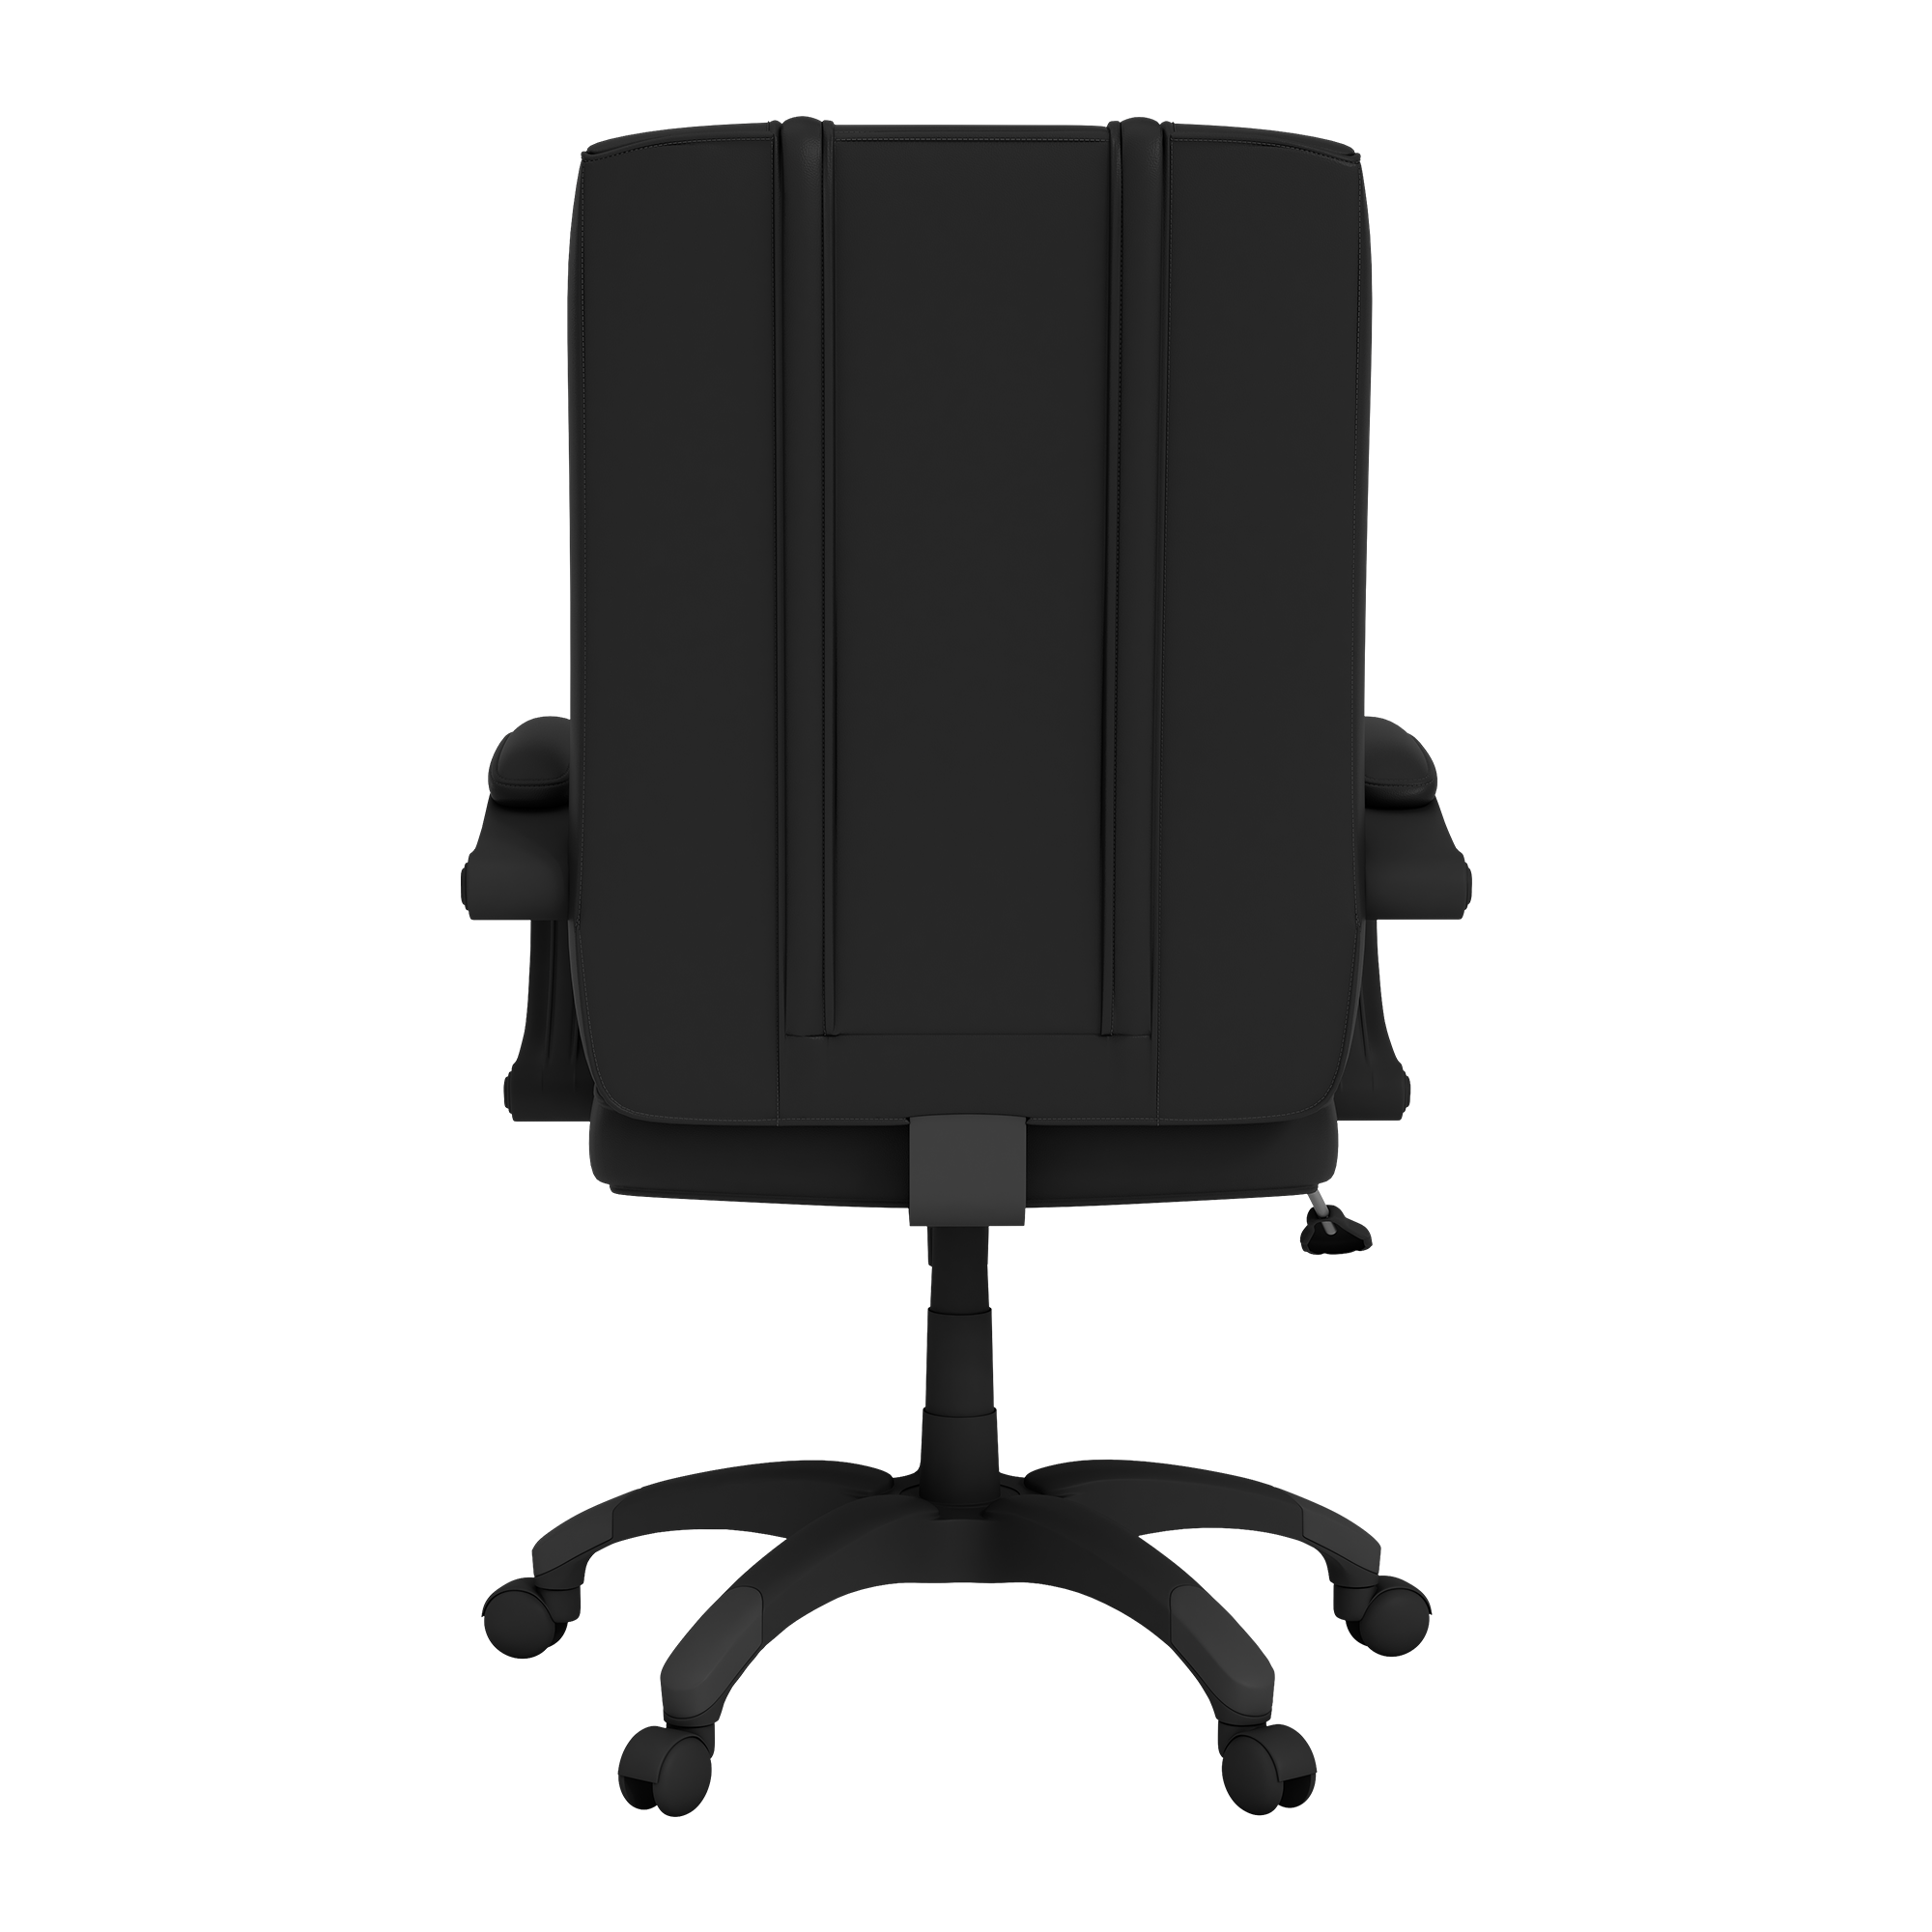 Office Chair 1000 with  Carolina Panthers Helmet Logo